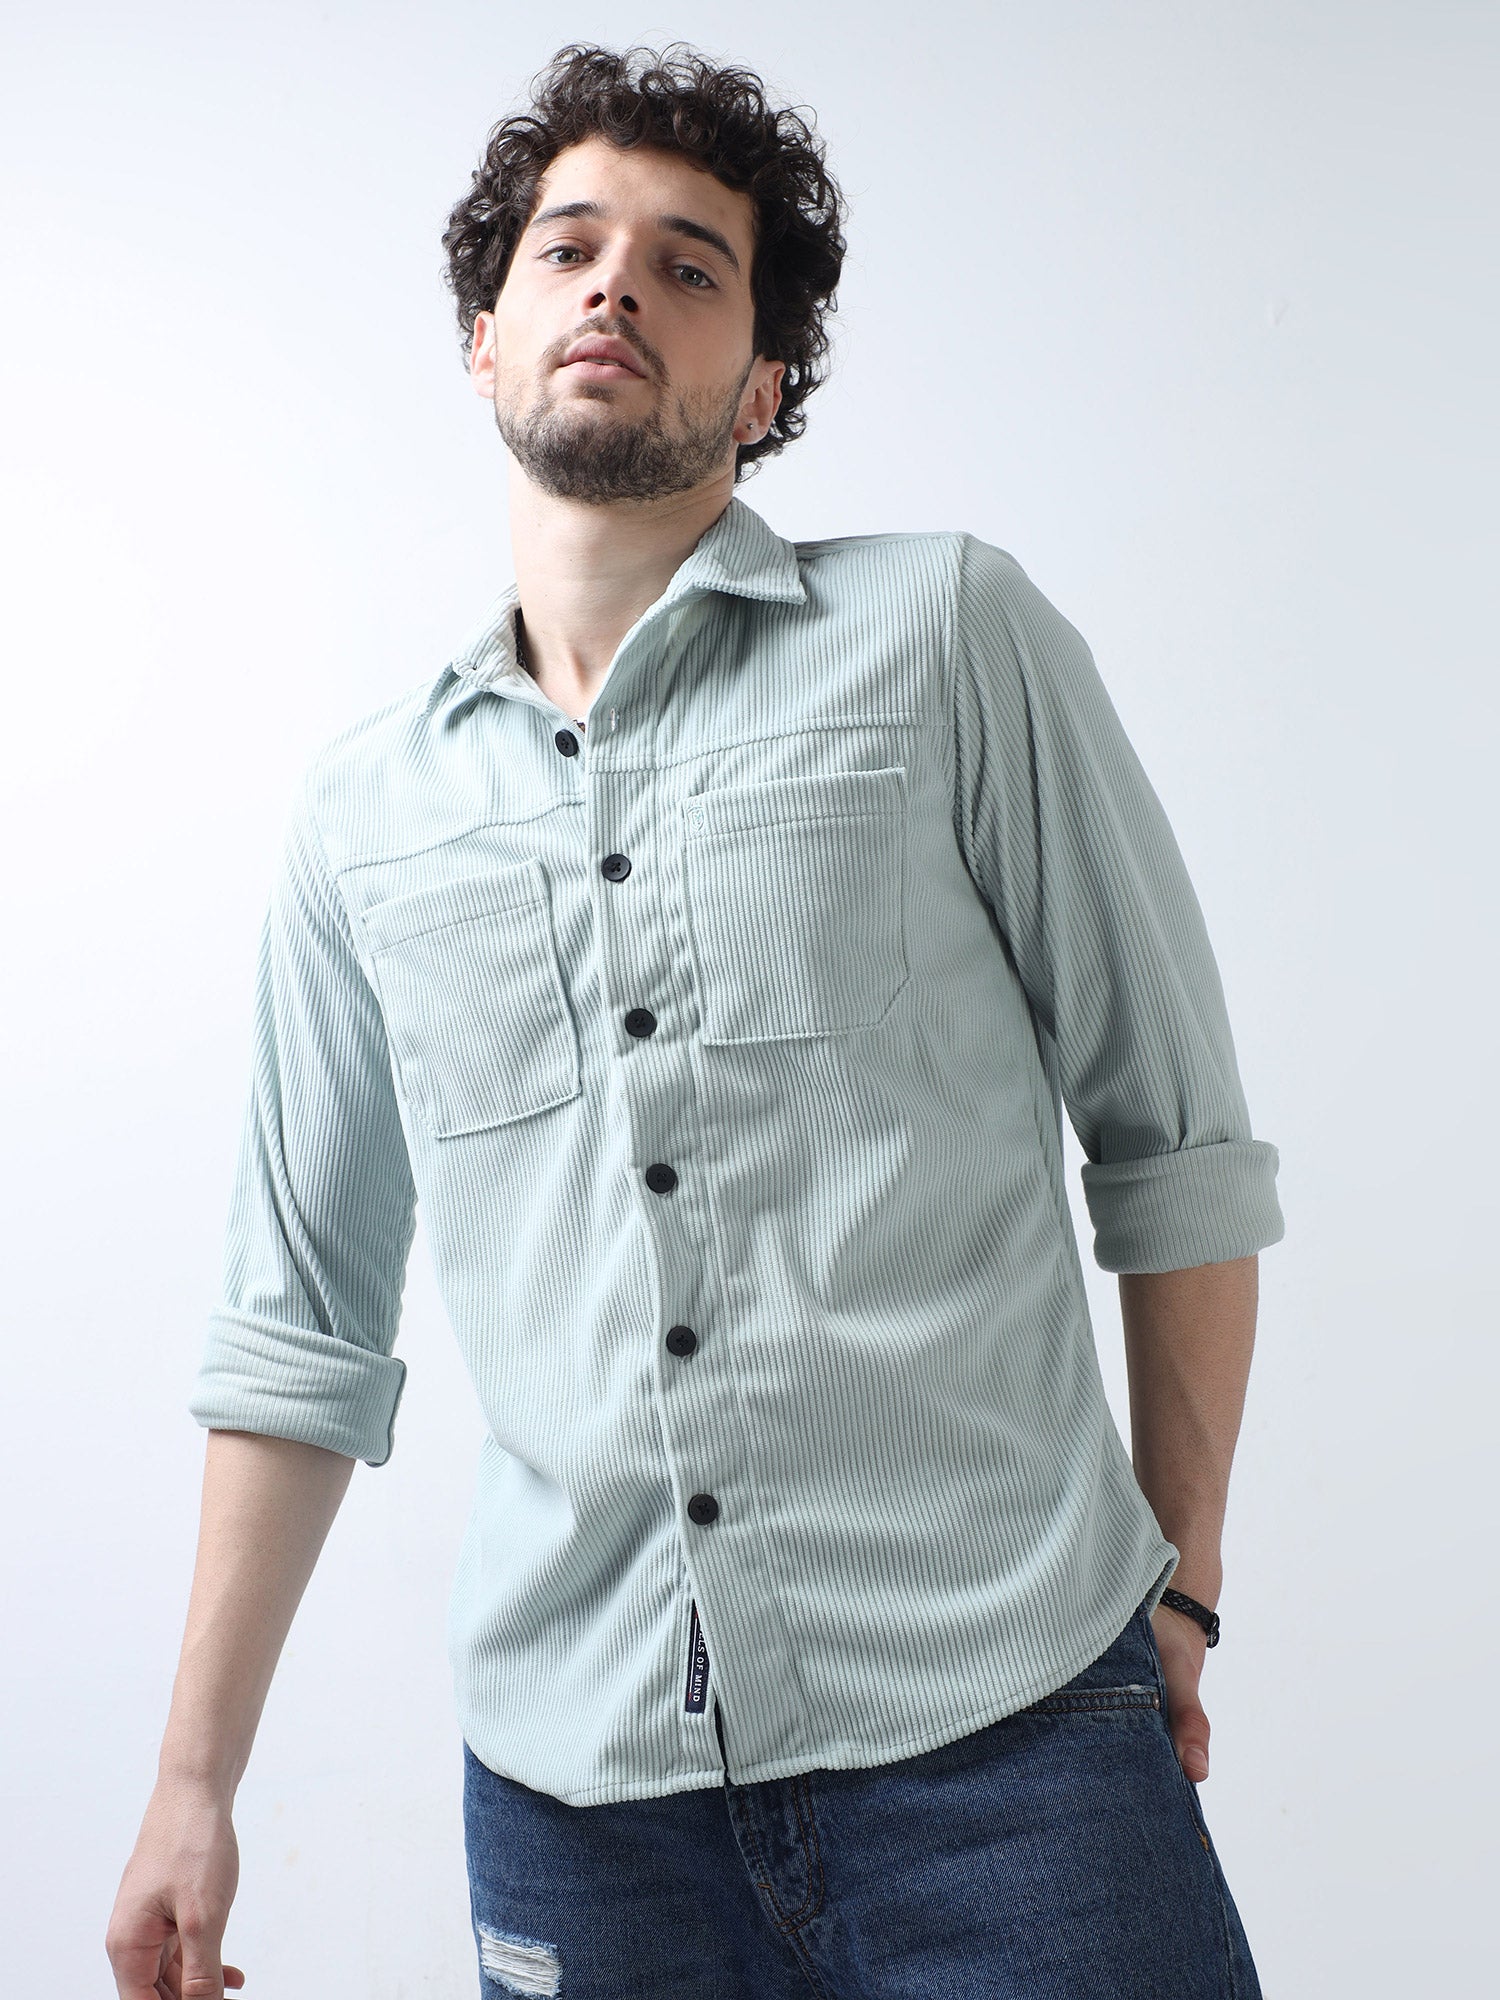 Buy cool green double pocket shirt at great priceRs. 1499.00